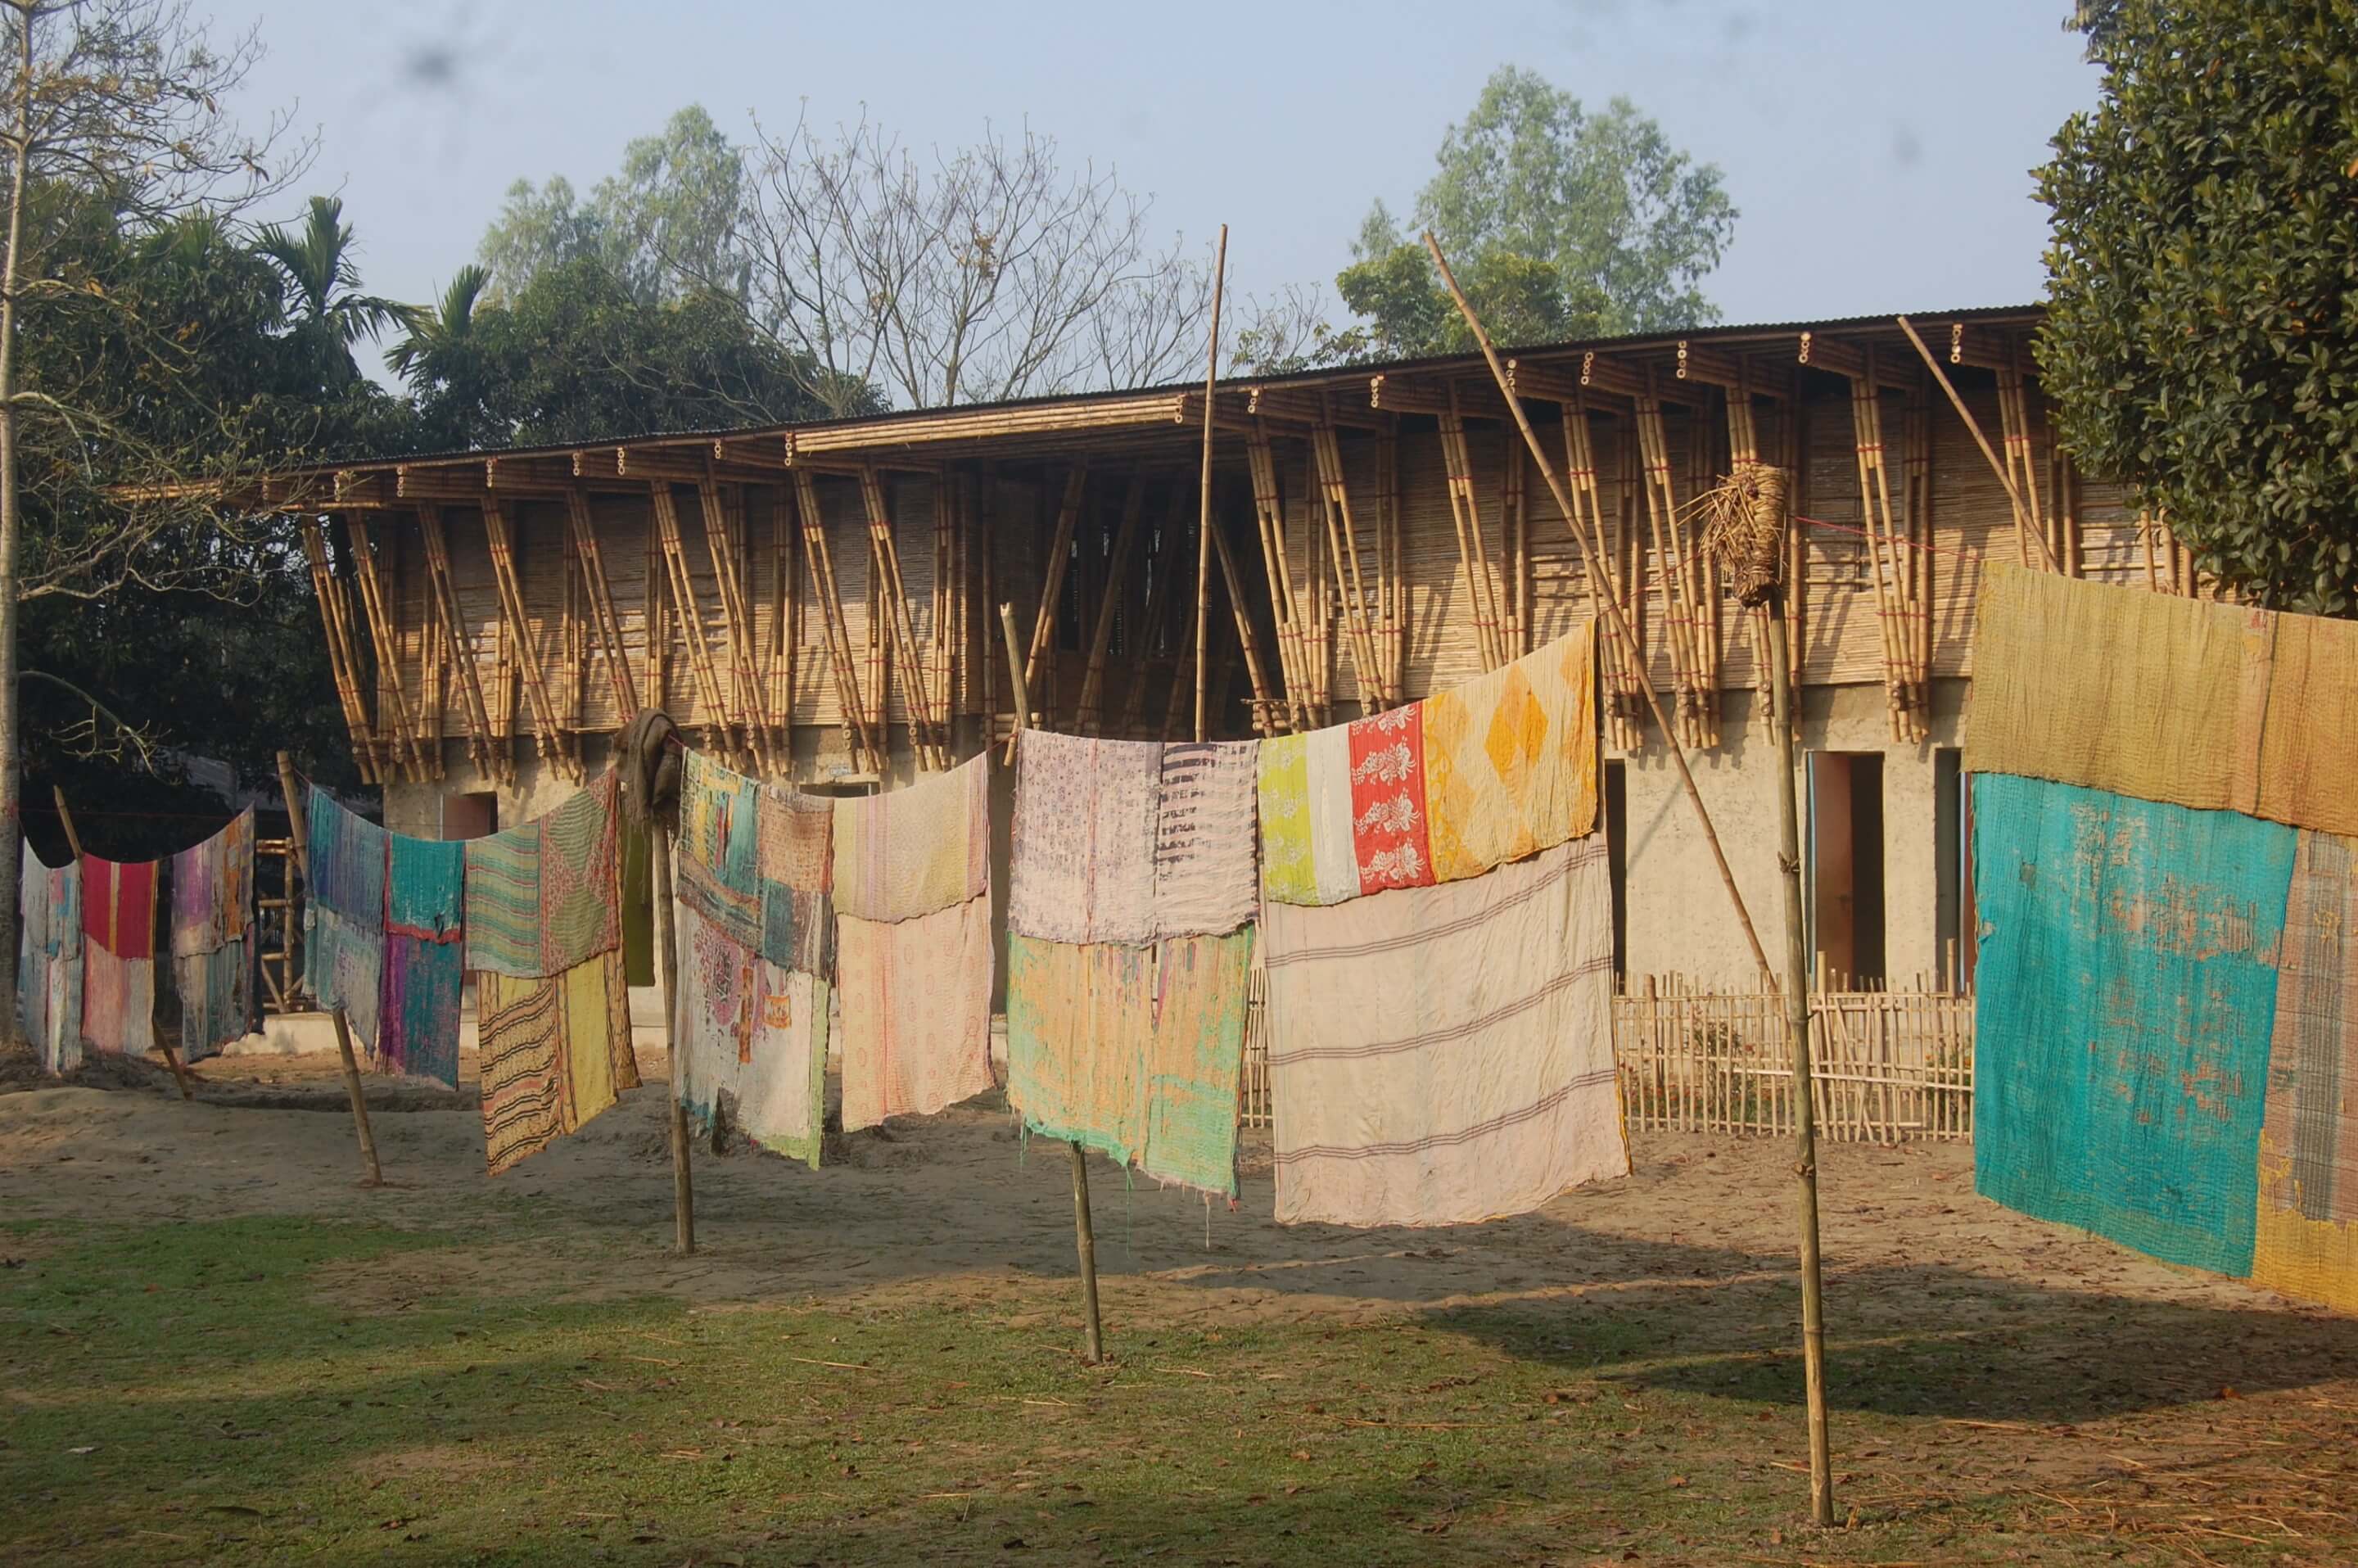 a rural school built from natural materials with tapestries hanging out front